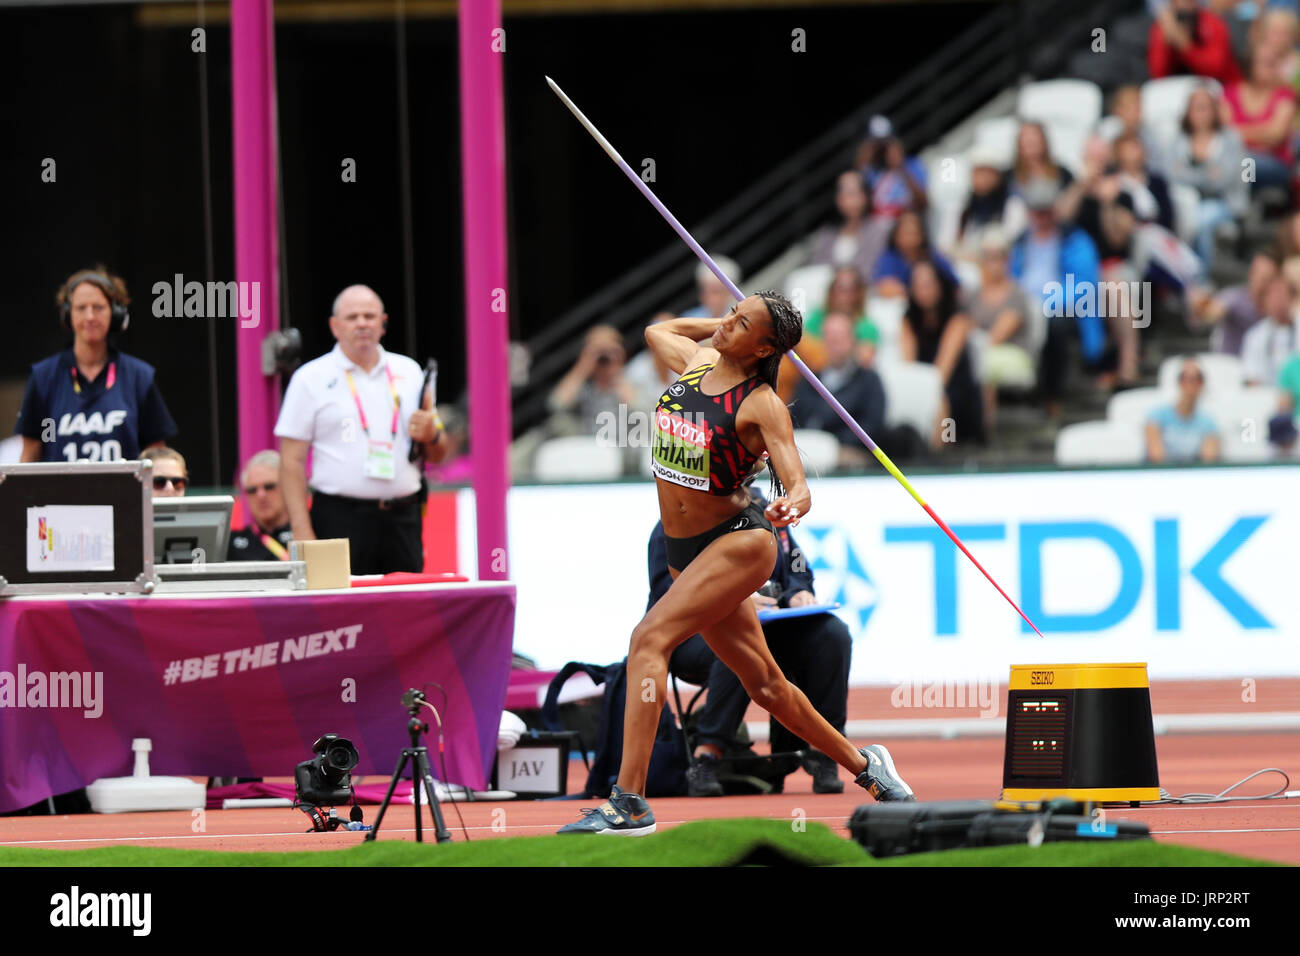 London, UK. 6th August, 2017. Nafissatou THIAM of Belgium competing in the Heptathlon Javelin throw at the 2017, IAAF World Championships, Queen Elizabeth Olympic Park, Stratford, London, UK. Credit: Simon Balson/Alamy Live News Stock Photo